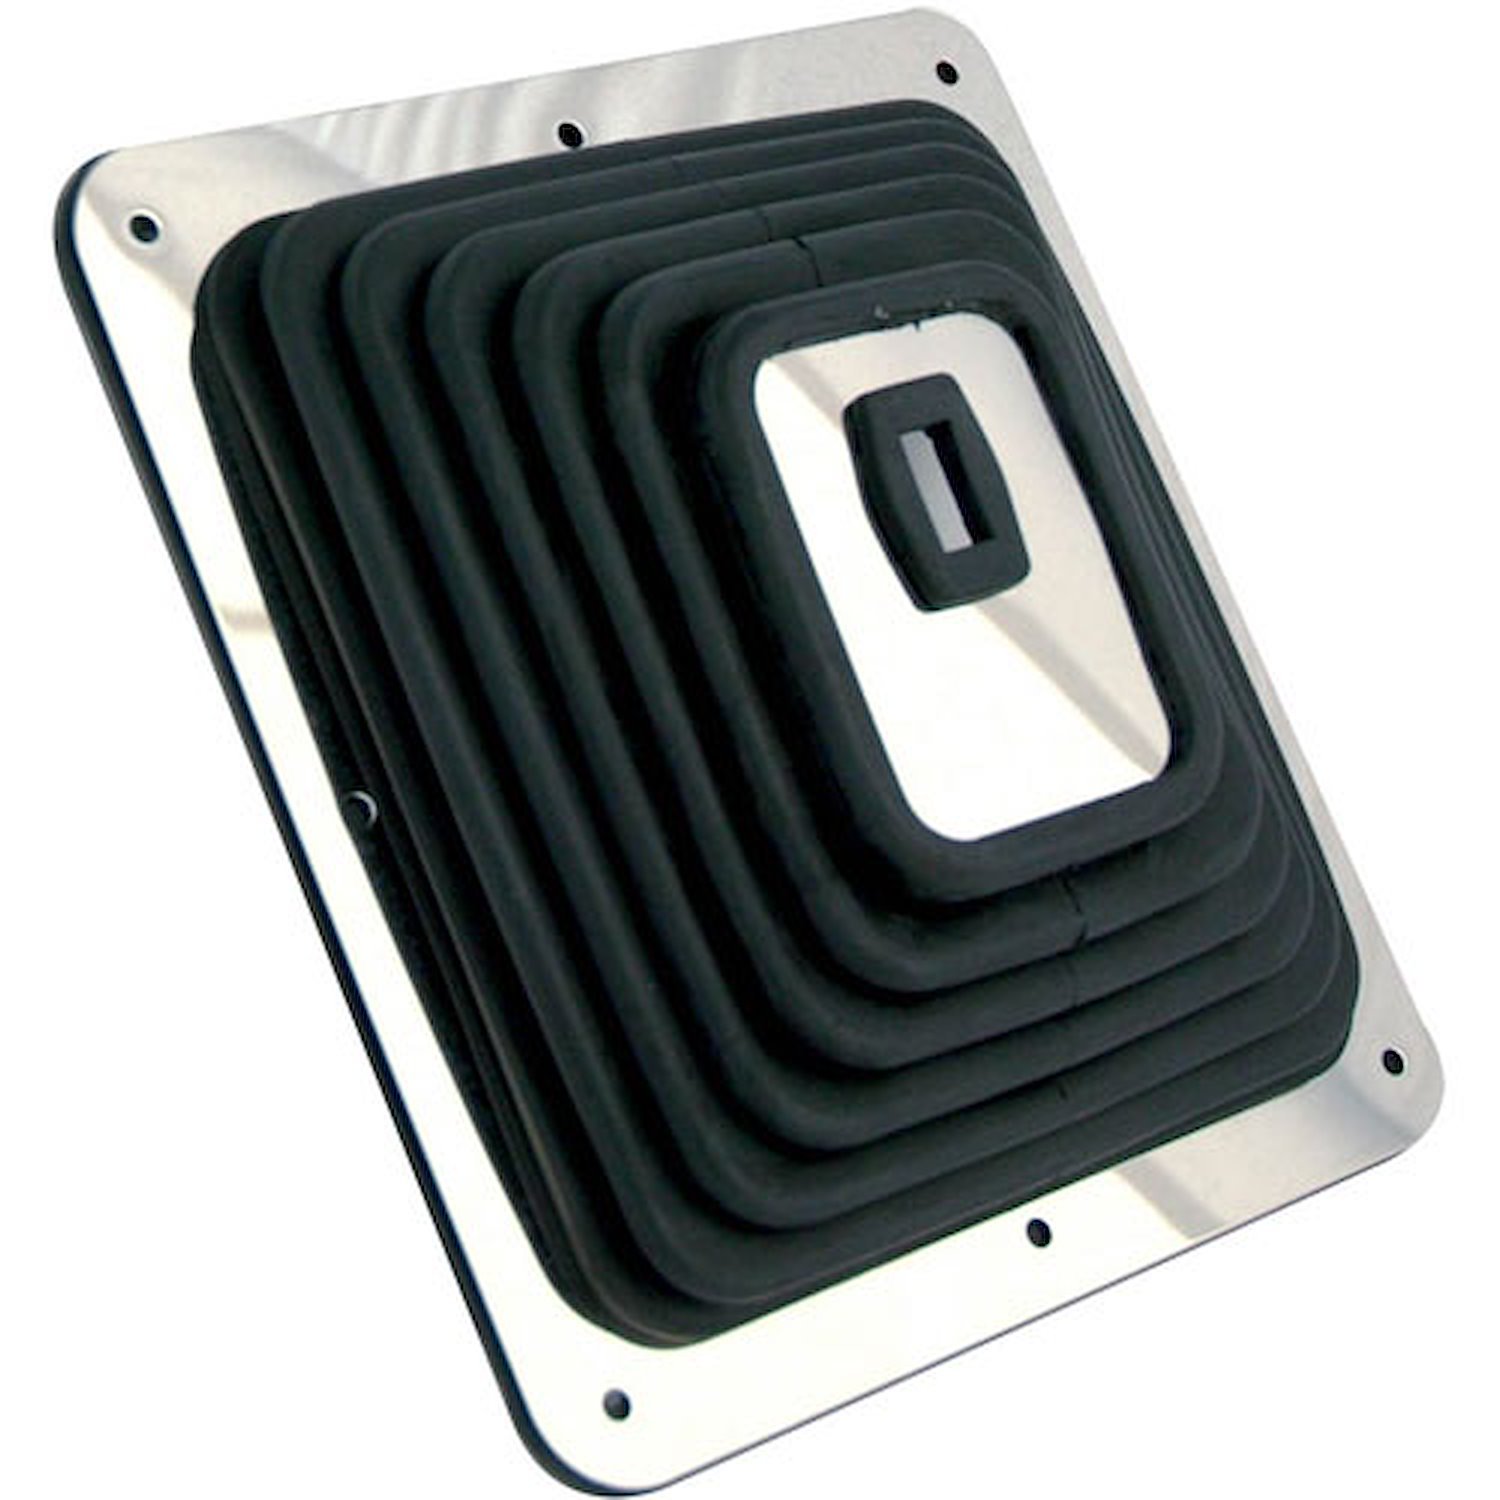 Large Shifter Boot Covers openings up to 6-3/4" x 7-3/4"